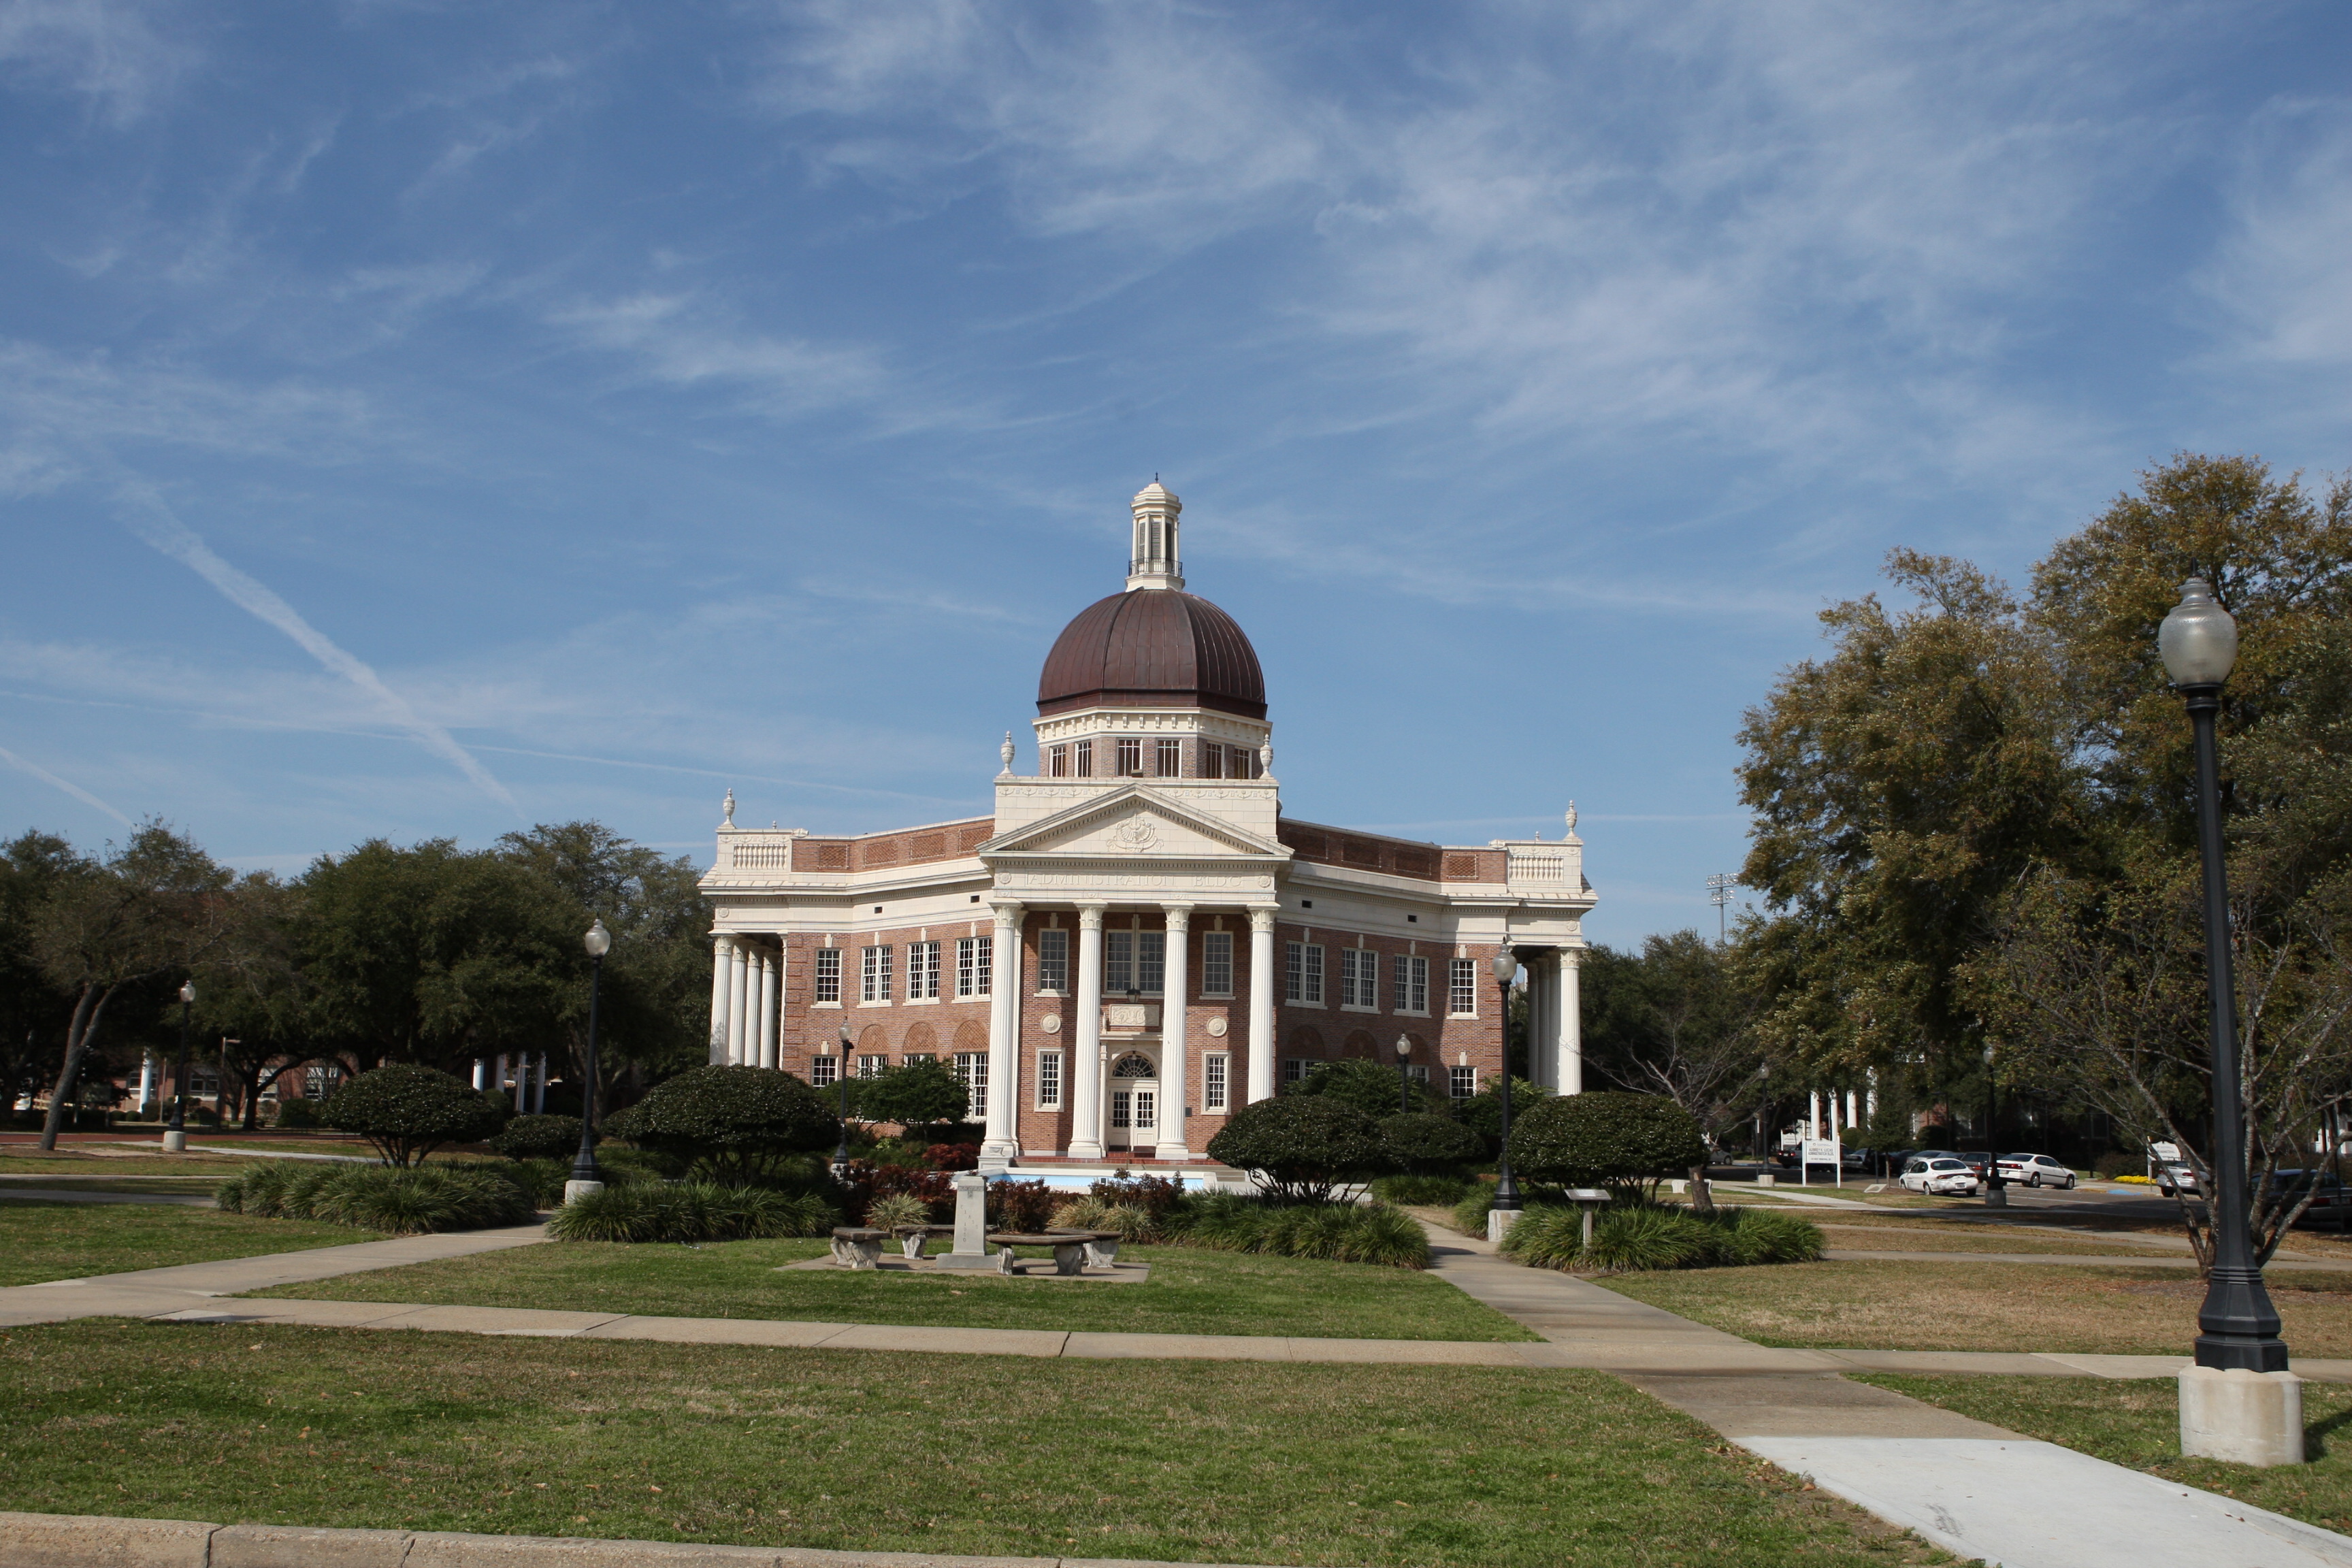 Administration Building, University of Southern Mississippi. https://commons.wikimedia.org/w/index.php?search=university+of+southern+mississippi+hattiesburg&title=Special:MediaSearch&go=Go&type=image